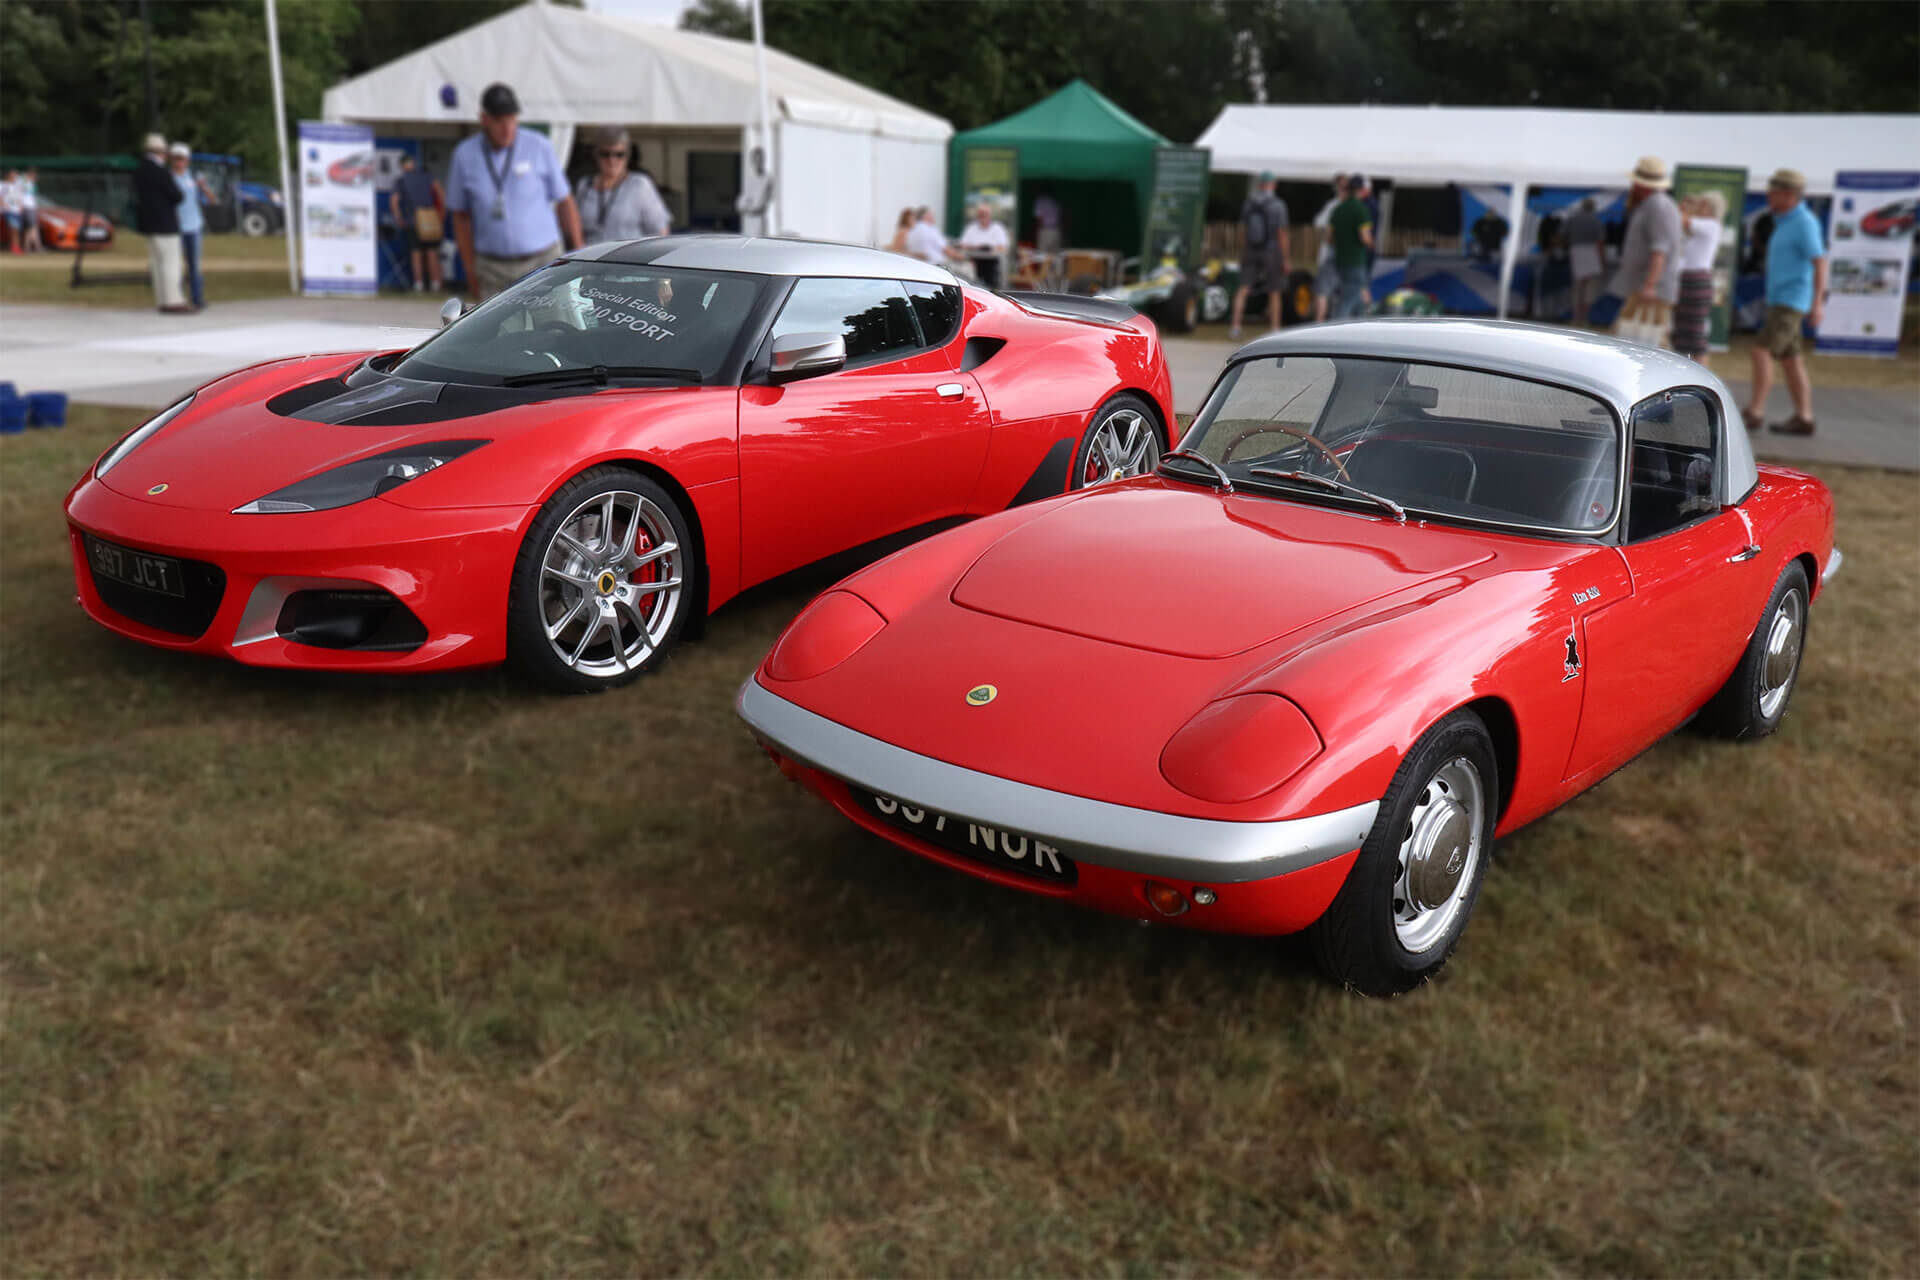 The Lotus Evora GT410 Sport and its historic 1962 Elan stablemate